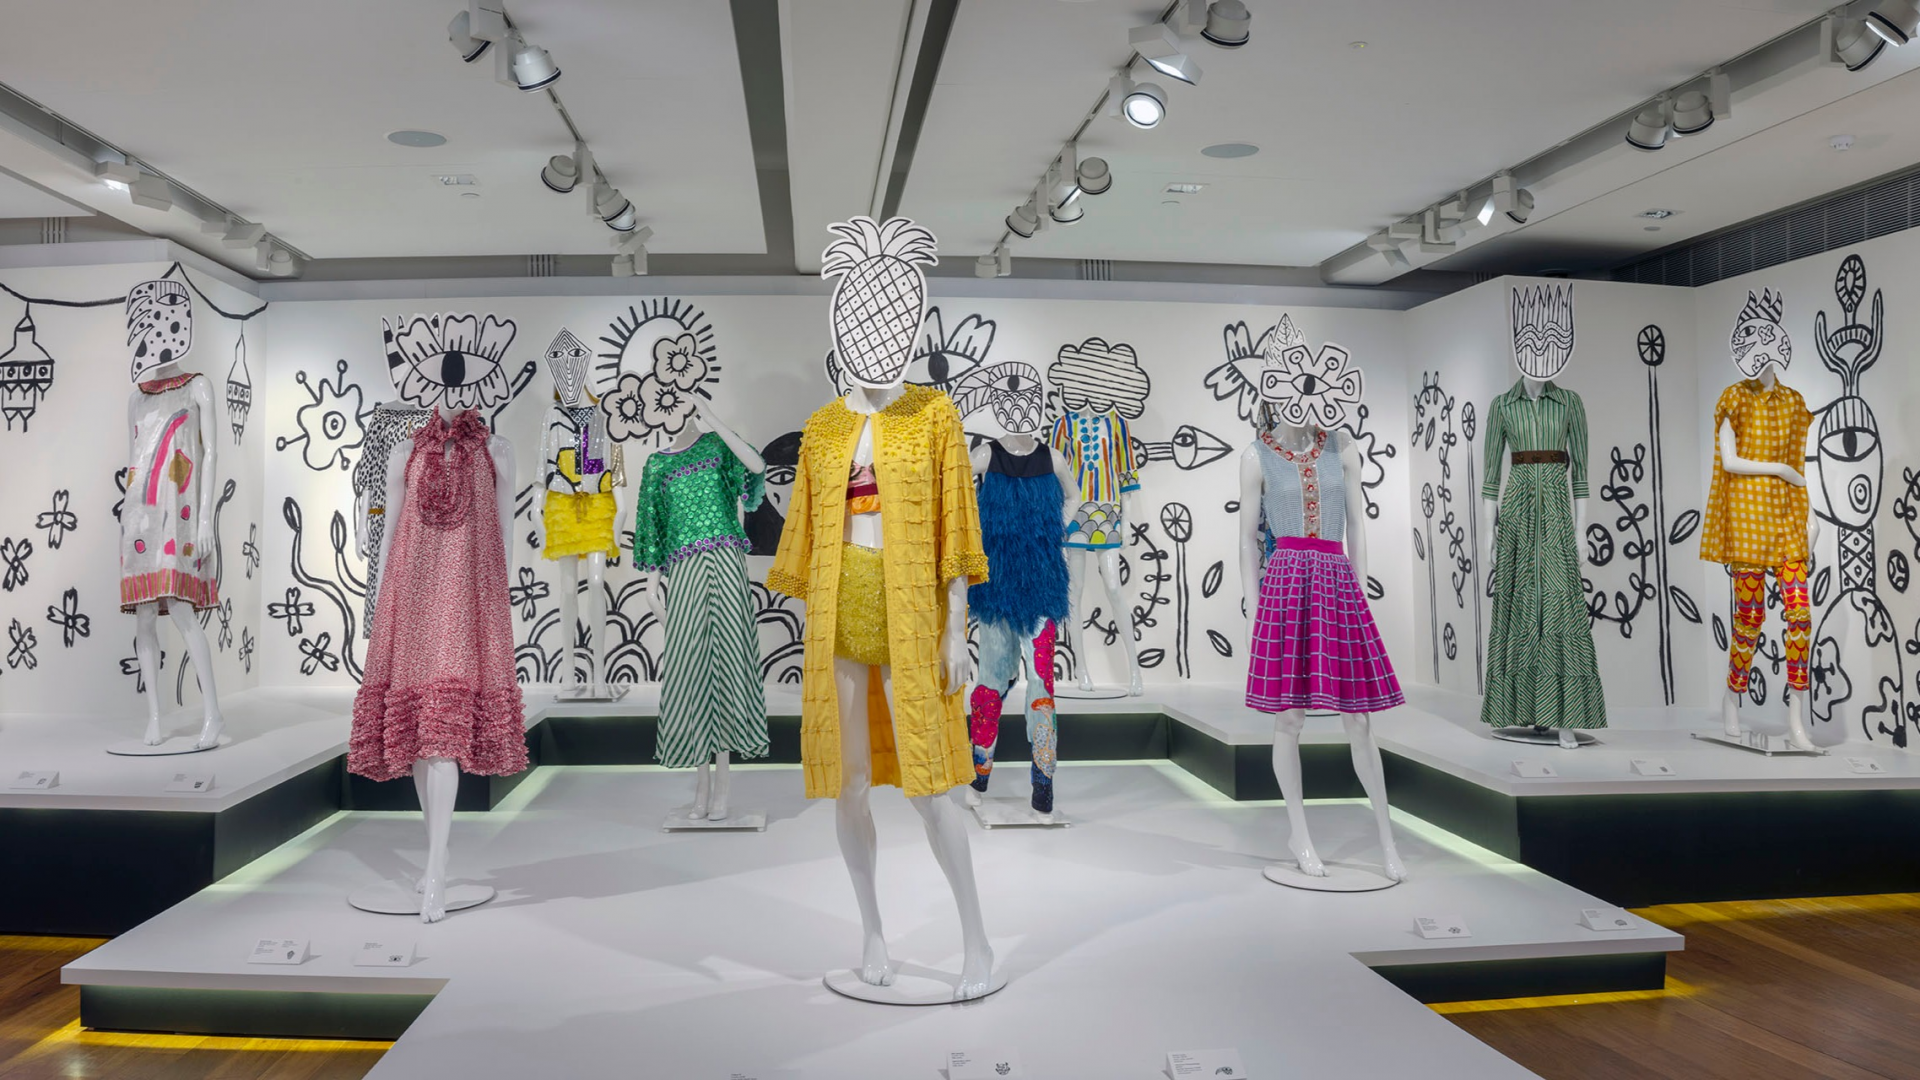 Installation view of East Pearson Archive exhibition. 10 white female mannequins are dressed in various outfits designed by Easton Pearson